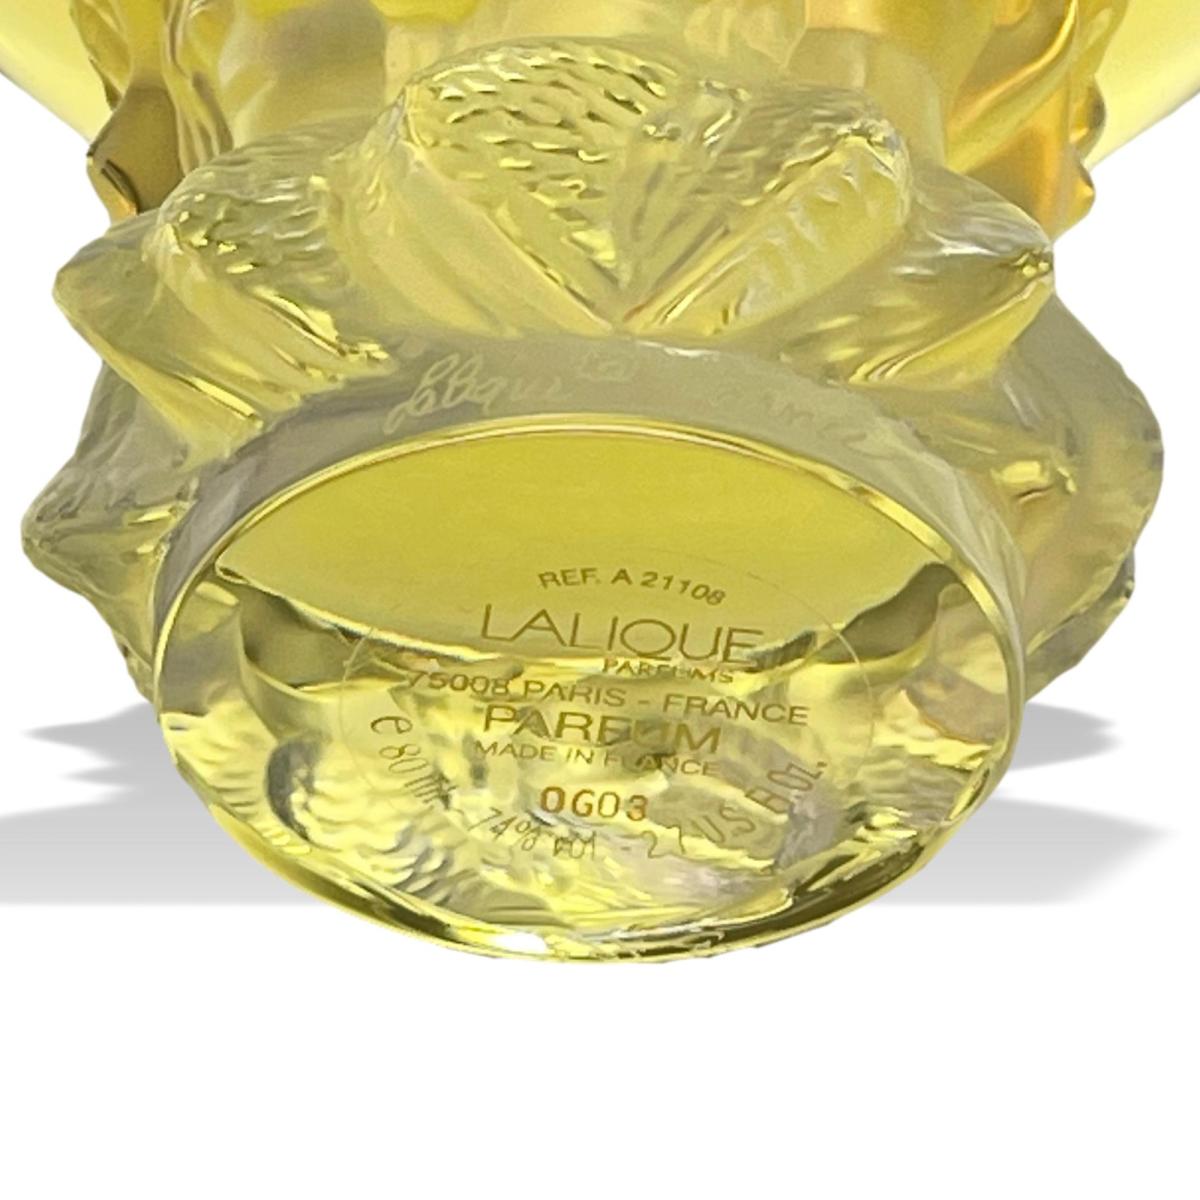 Limited Edition Perfume Bottle entitled "Les Sirens" by Marie Claude Lalique